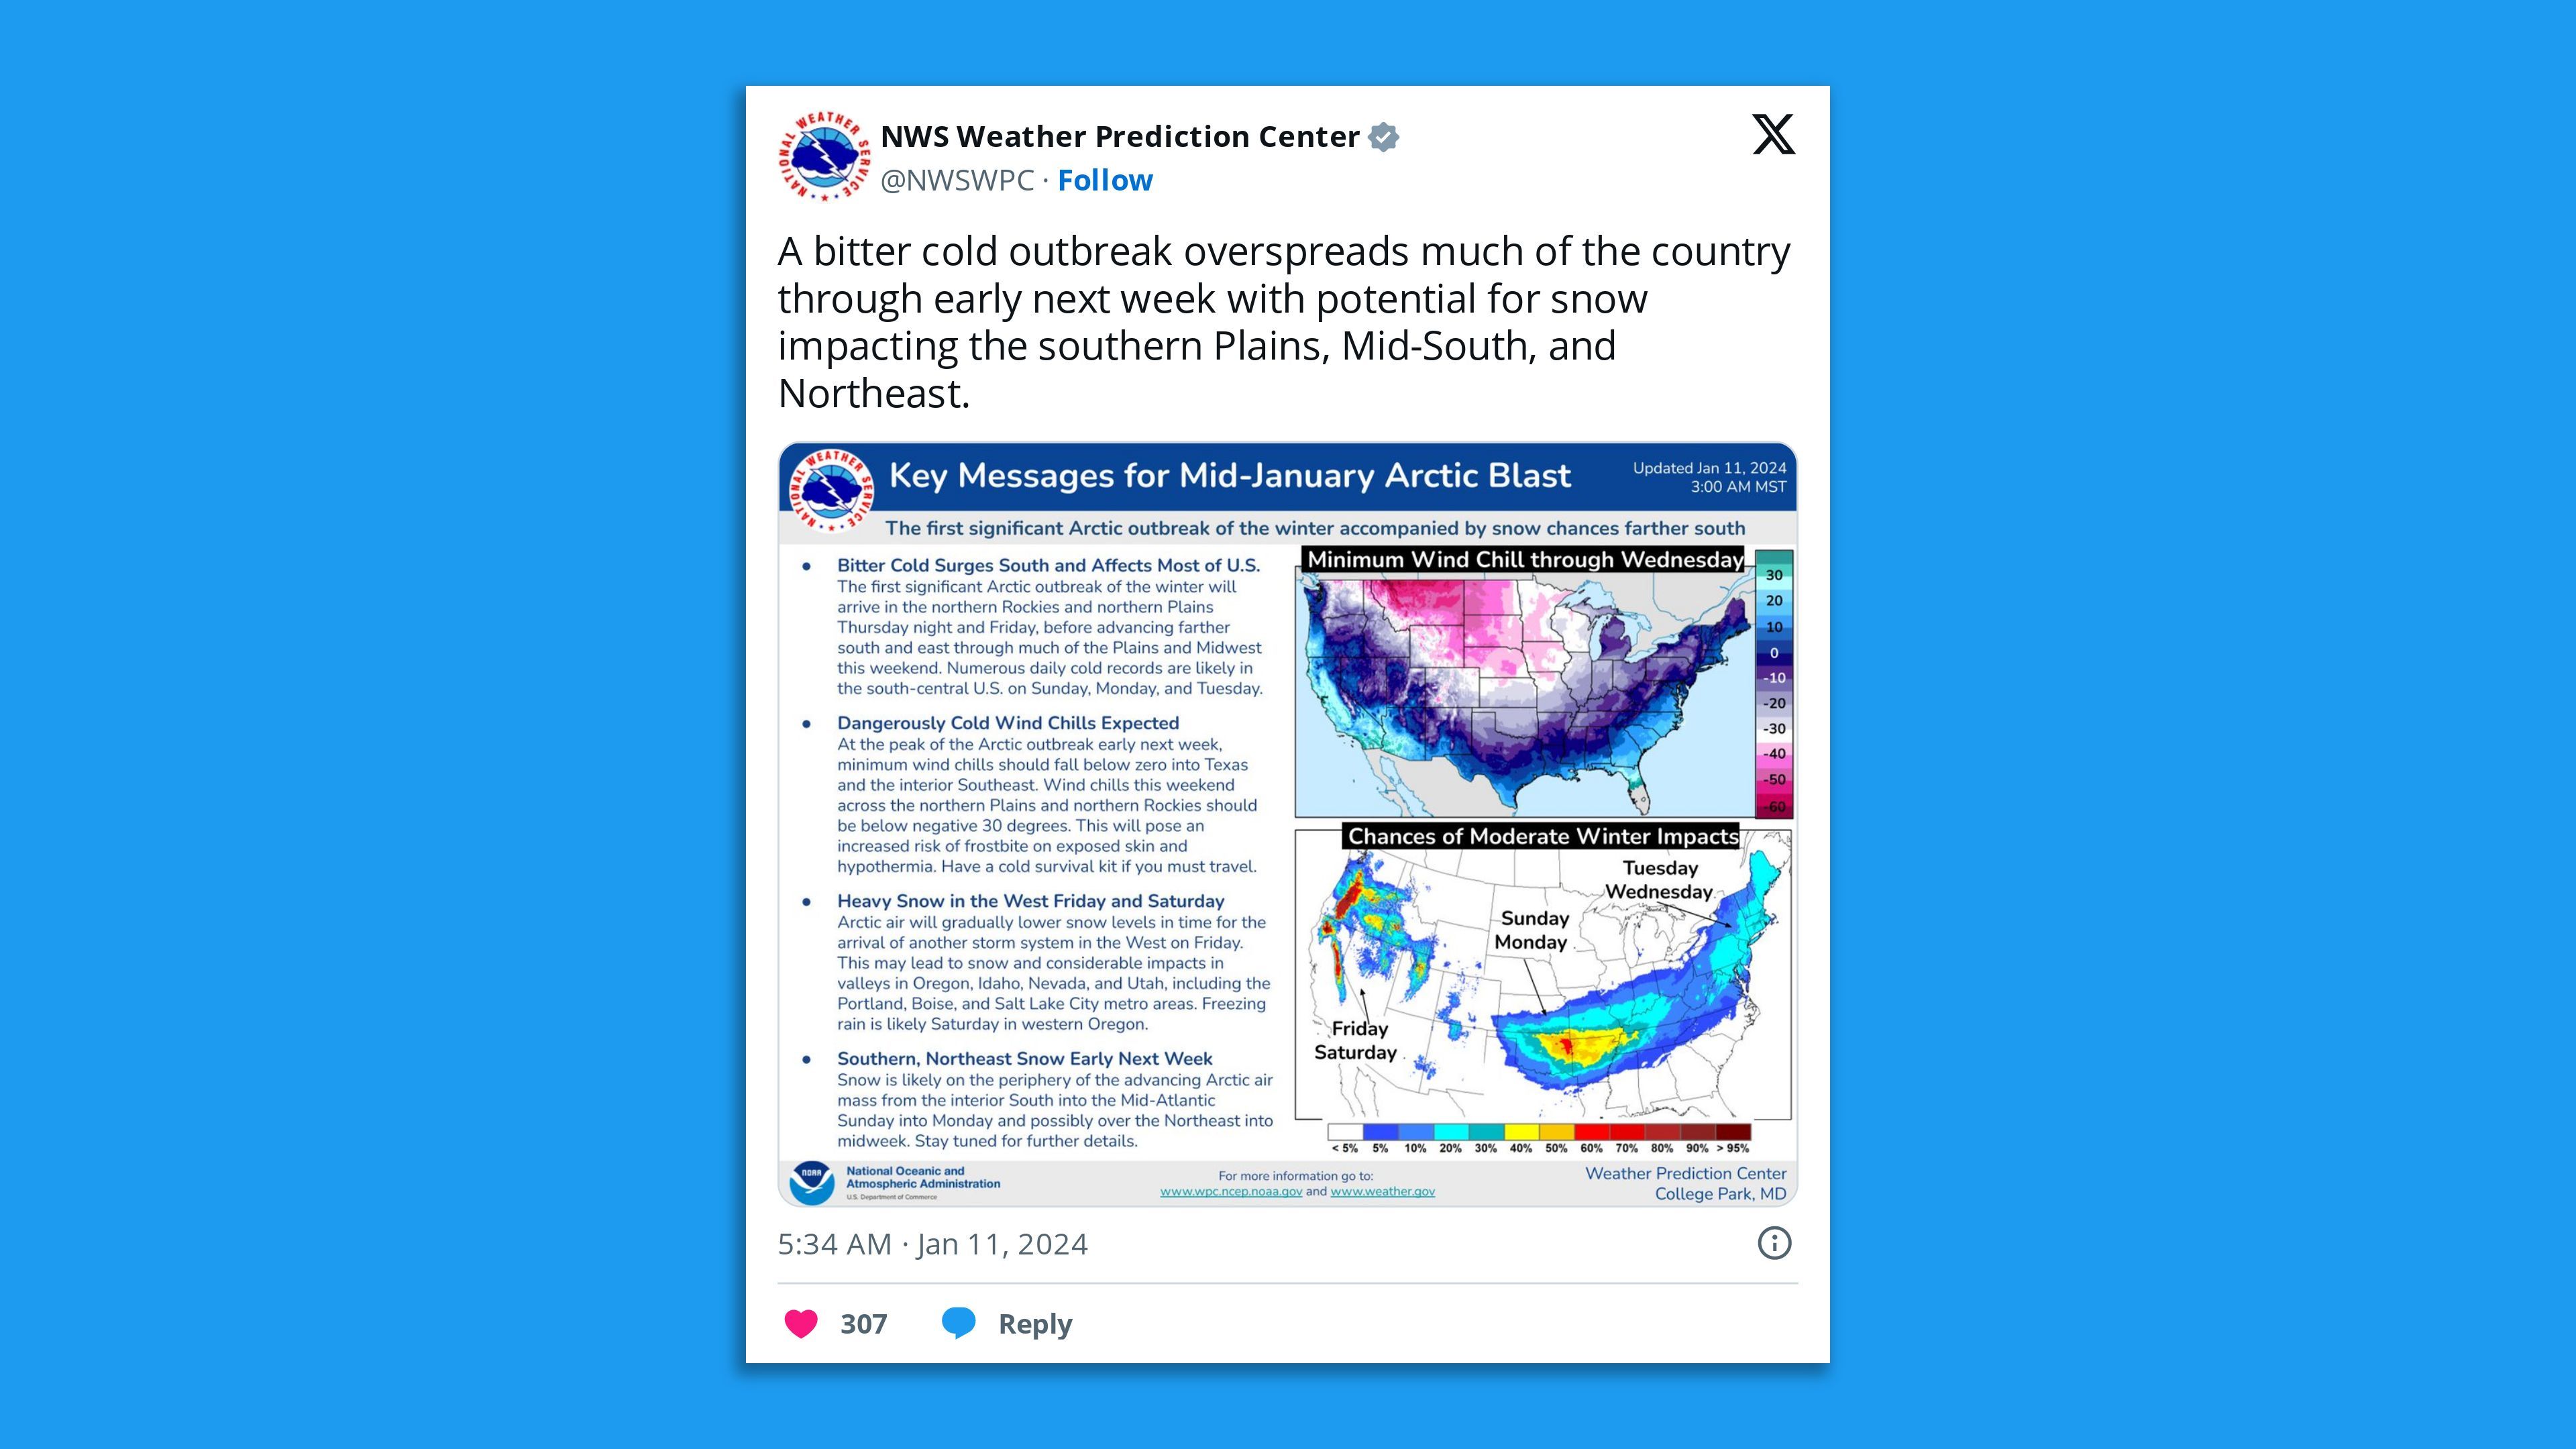 Image of a tweet from the National Weather Service showing details of the upcoming cold snap.